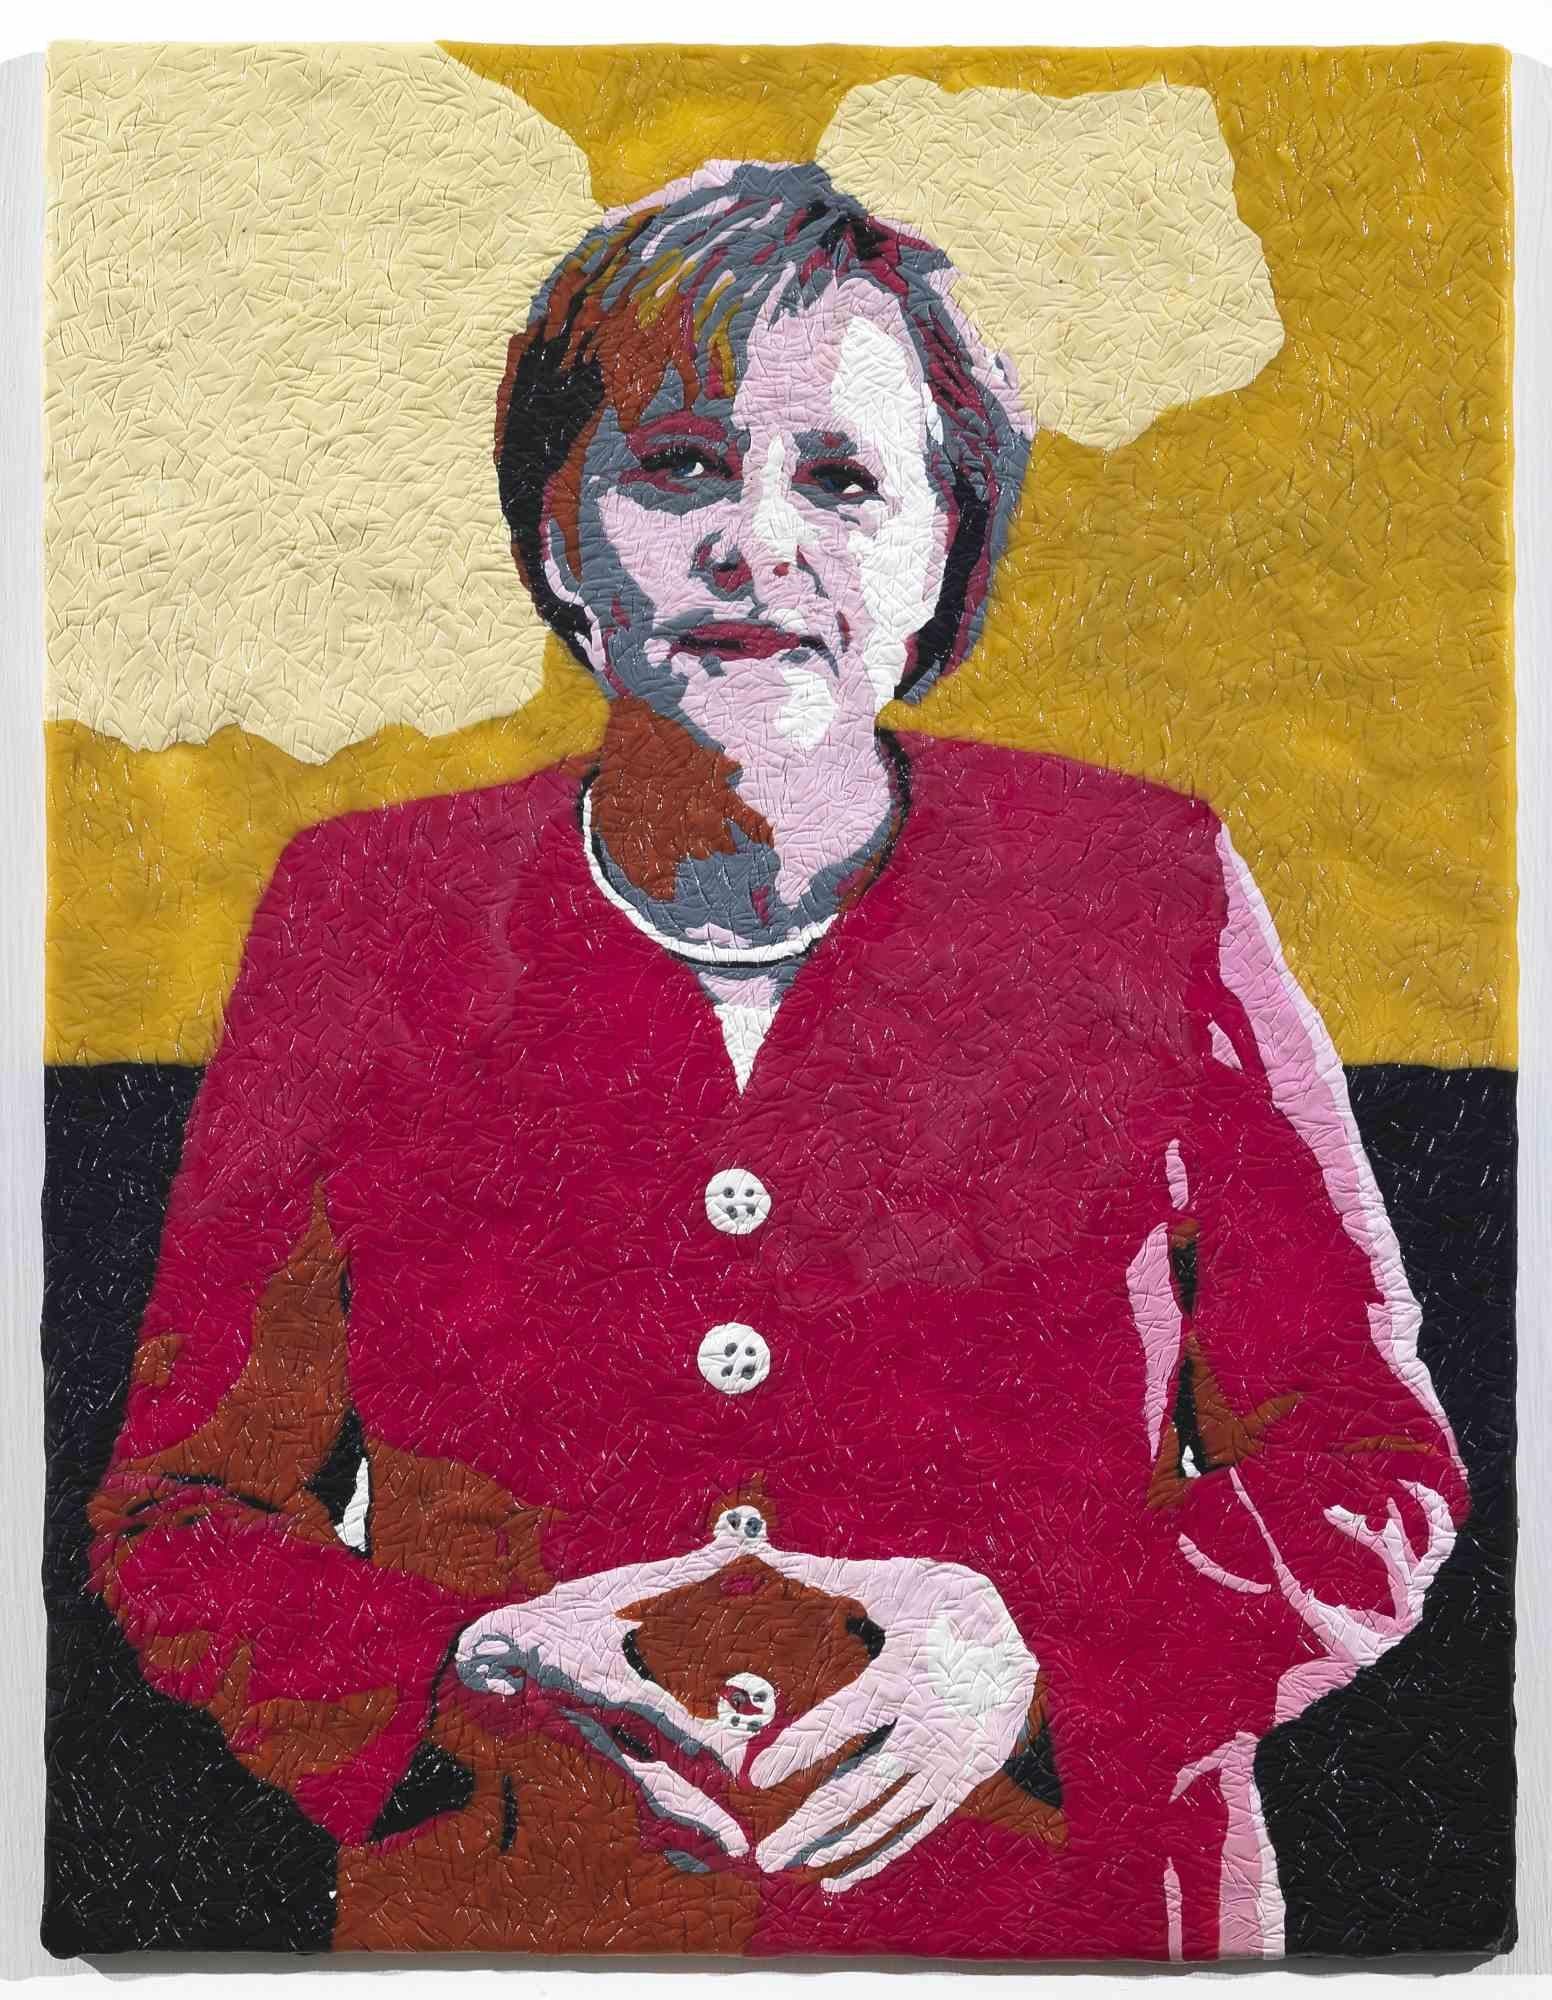 Merkel is an original Contemporary Arwork realized by the Italian artist Maurizio Savini (b. Rome, 1962) in 2014. 

Original Encaustic of chewing gum on board. 

Hand-signed by the artist on the back.

The Certificate of Authenticity is provided by